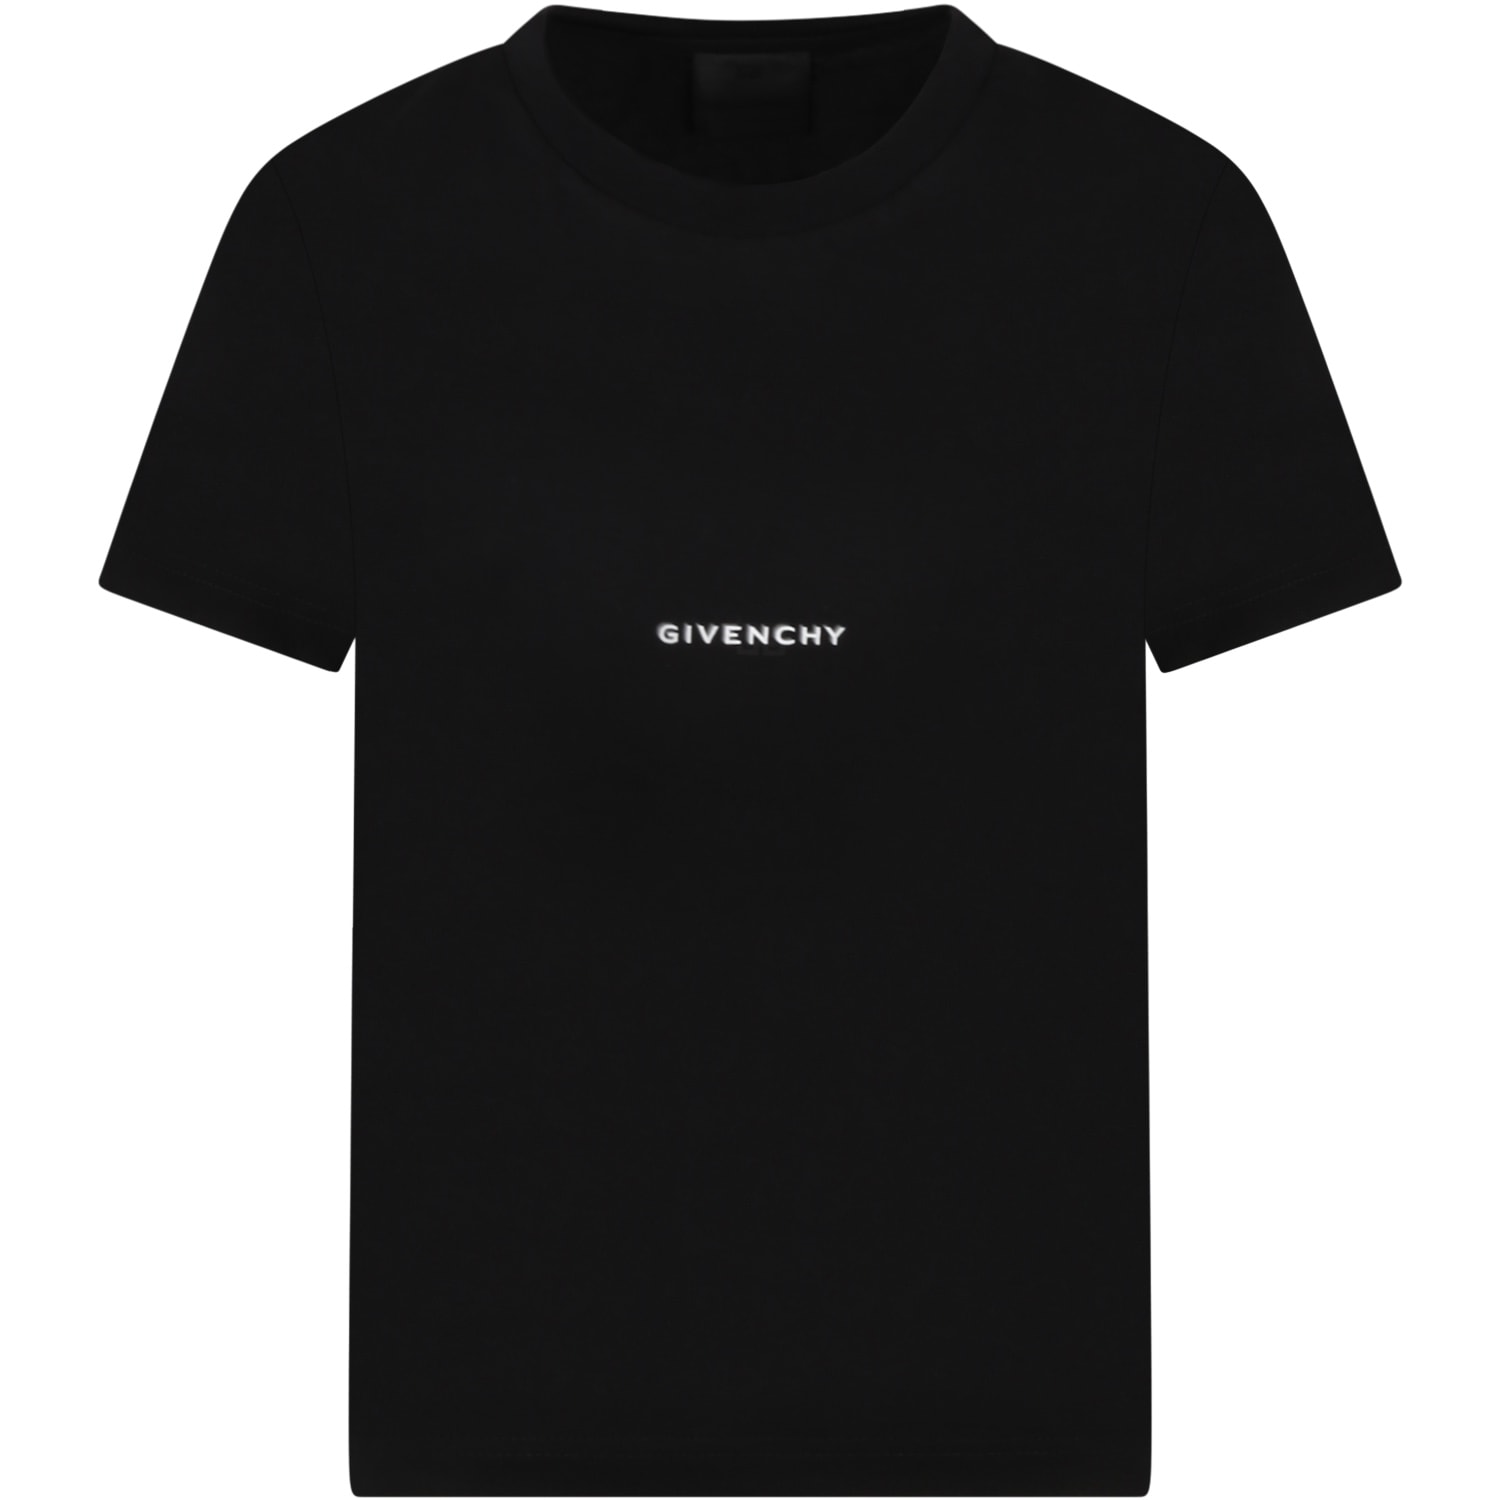 Givenchy Black T-shirt For Kids With Logo